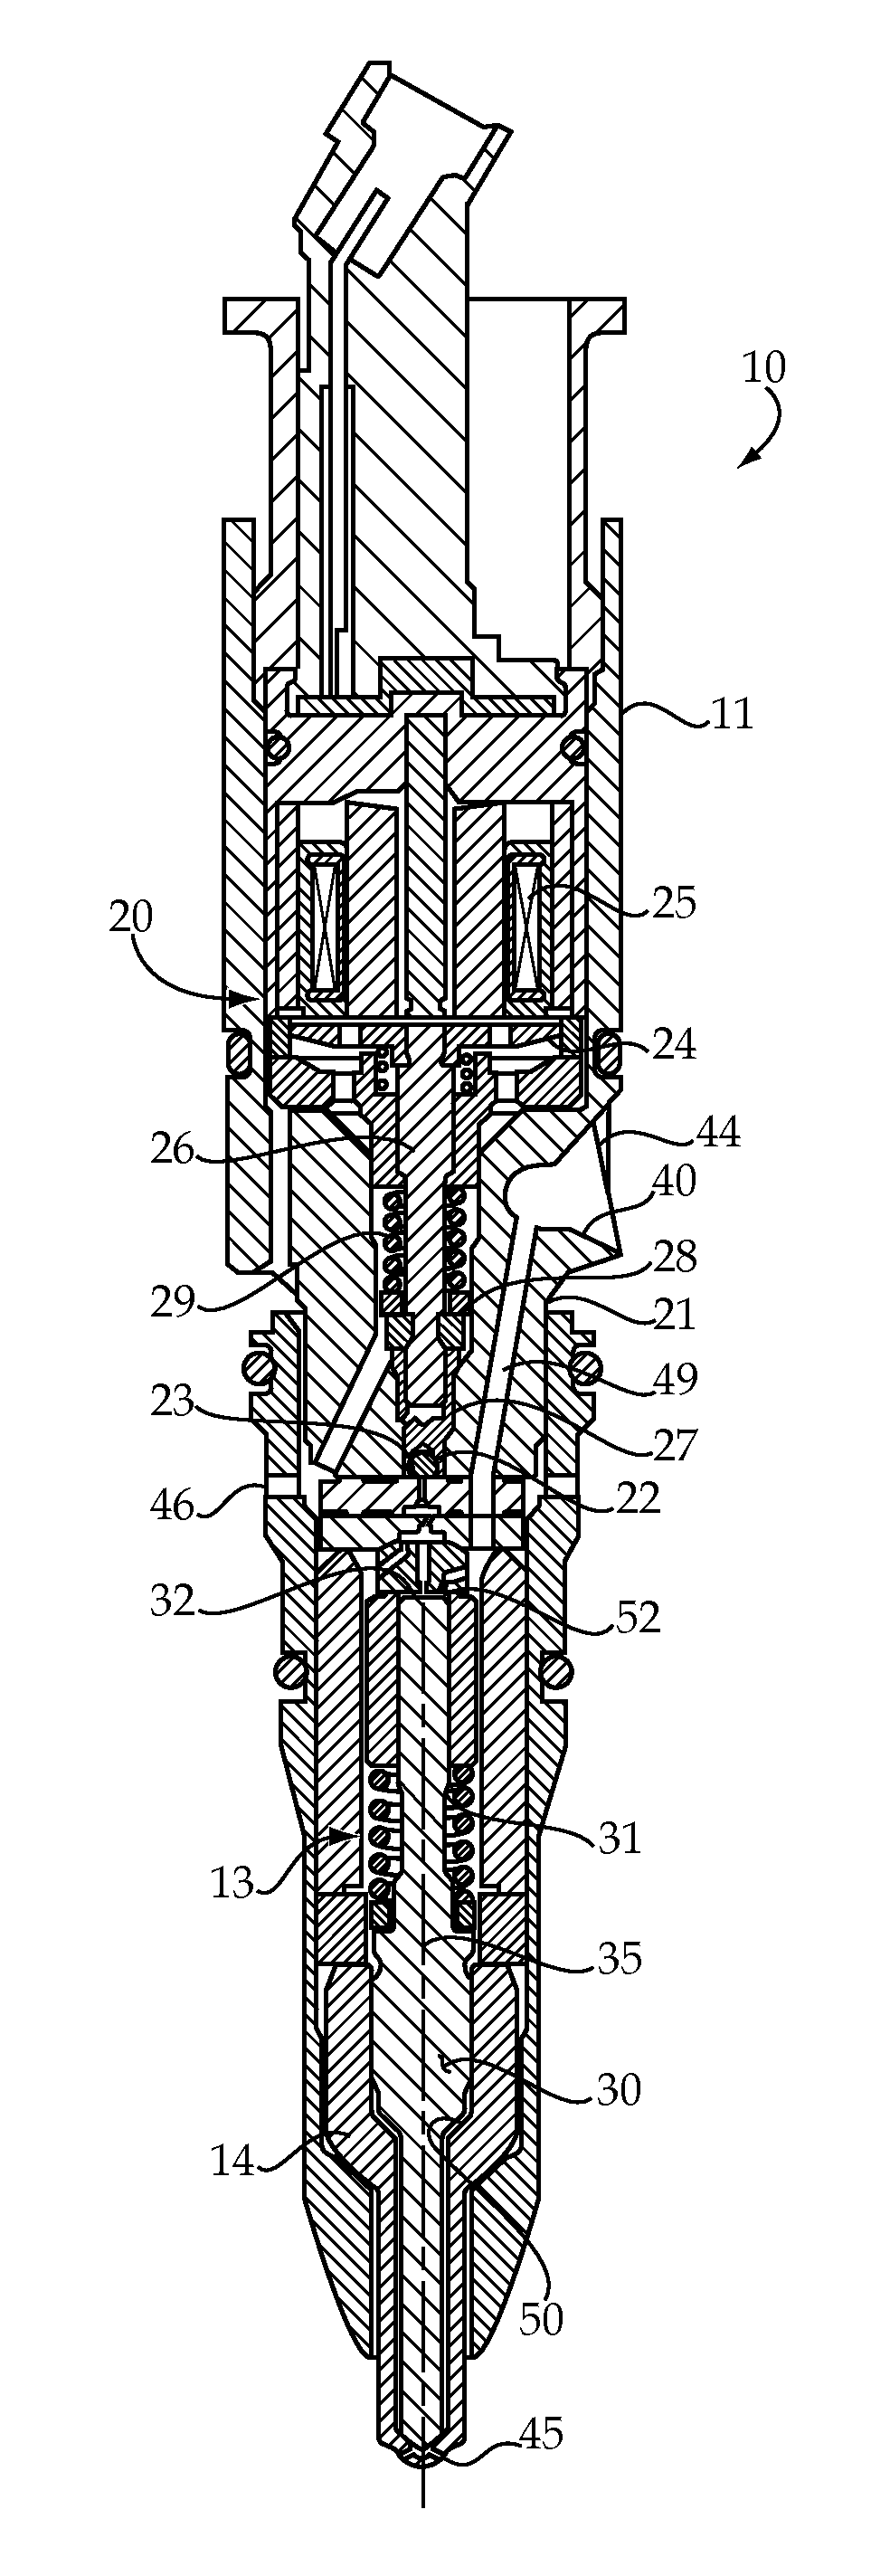 Fuel Injector With Needle Control System That Includes F, A, Z and E Orifices